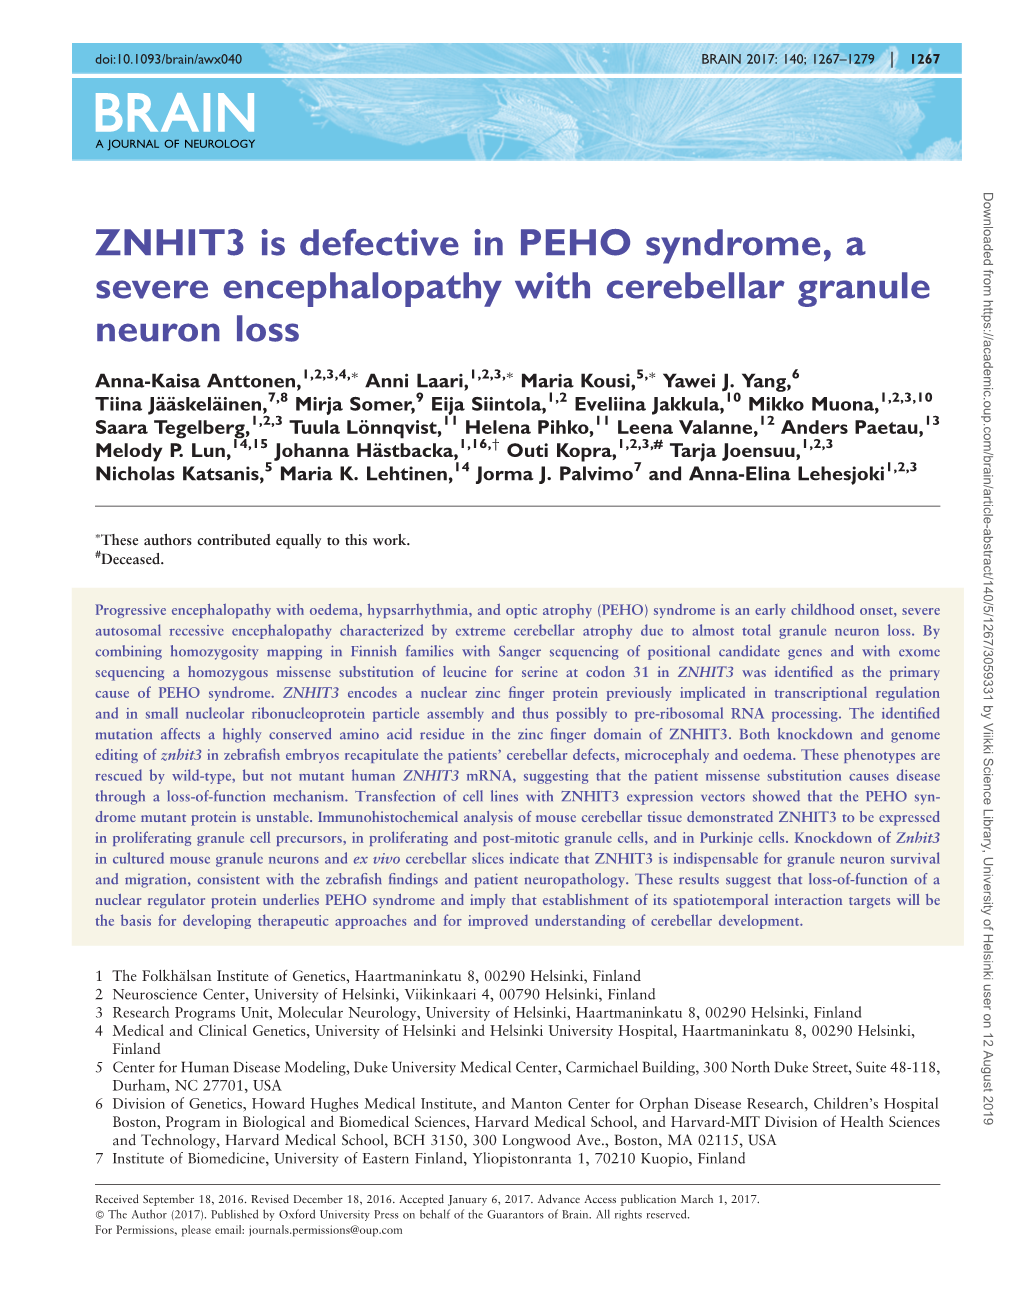 ZNHIT3 Is Defective in PEHO Syndrome, a Severe Encephalopathy with Cerebellar Granule Neuron Loss